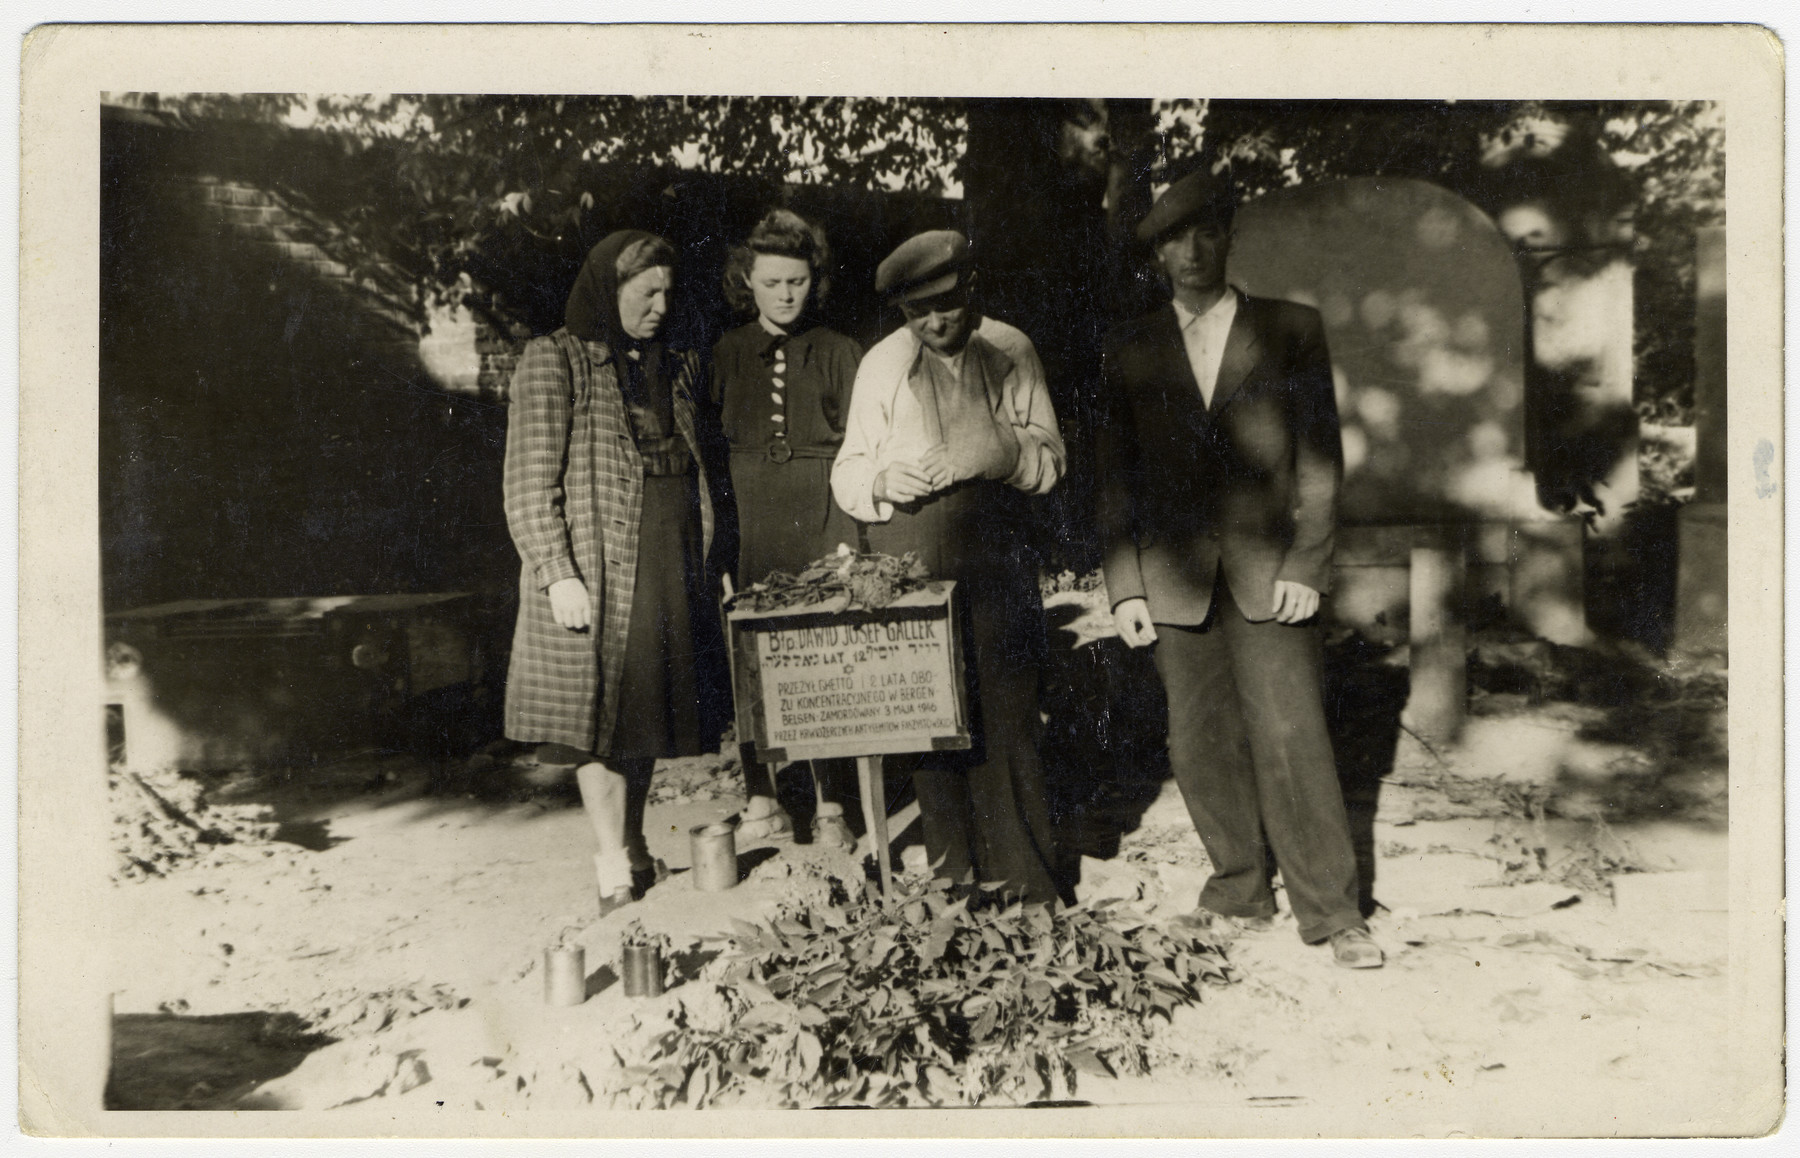 The Galler family stands by the grave of Jews killed in a postwar attack on members of the Zionist group Gordonia outside of Krakow.

Among those killed was Yosef Galler.  Pictured are Maria Galler (his mother), Renna Galler (his sister) and Izrael Galler (his father).  The man on the far right is unidentified.  The family survived Bergen-Belsen on Argentinian papers and were liberated on the train in Fallersleben.